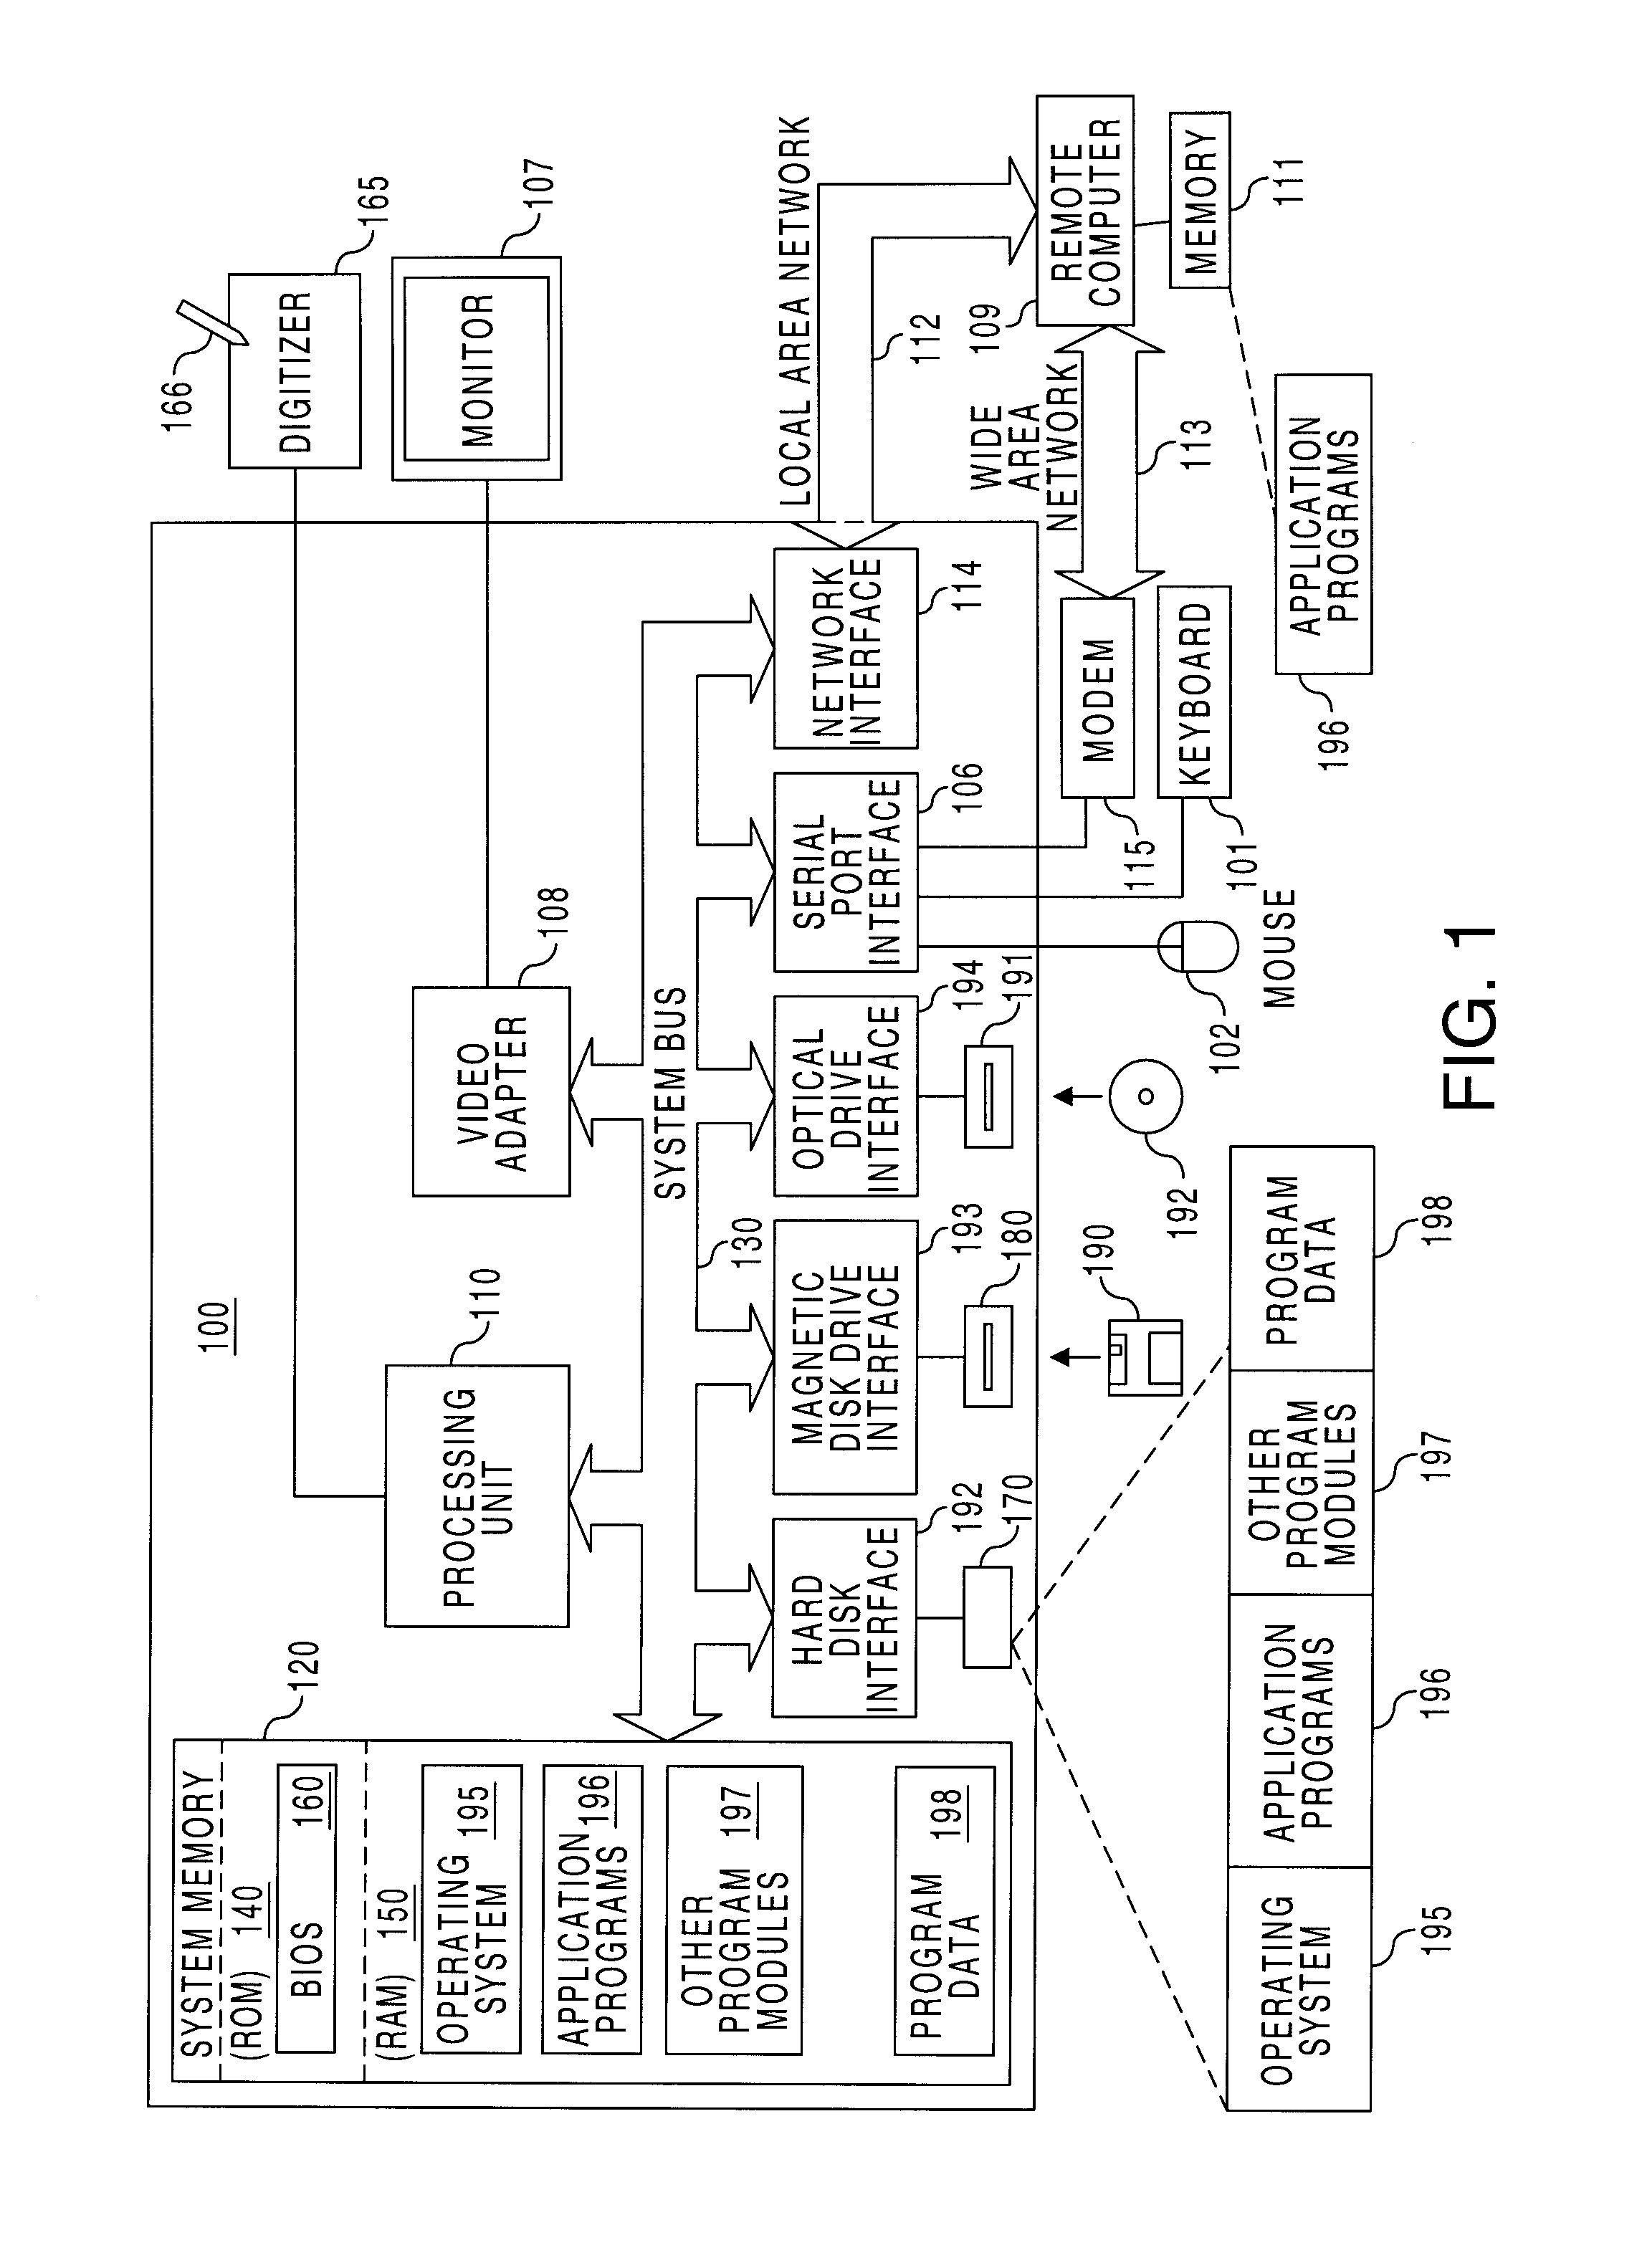 Correction of alignment and linearity errors in a stylus input system